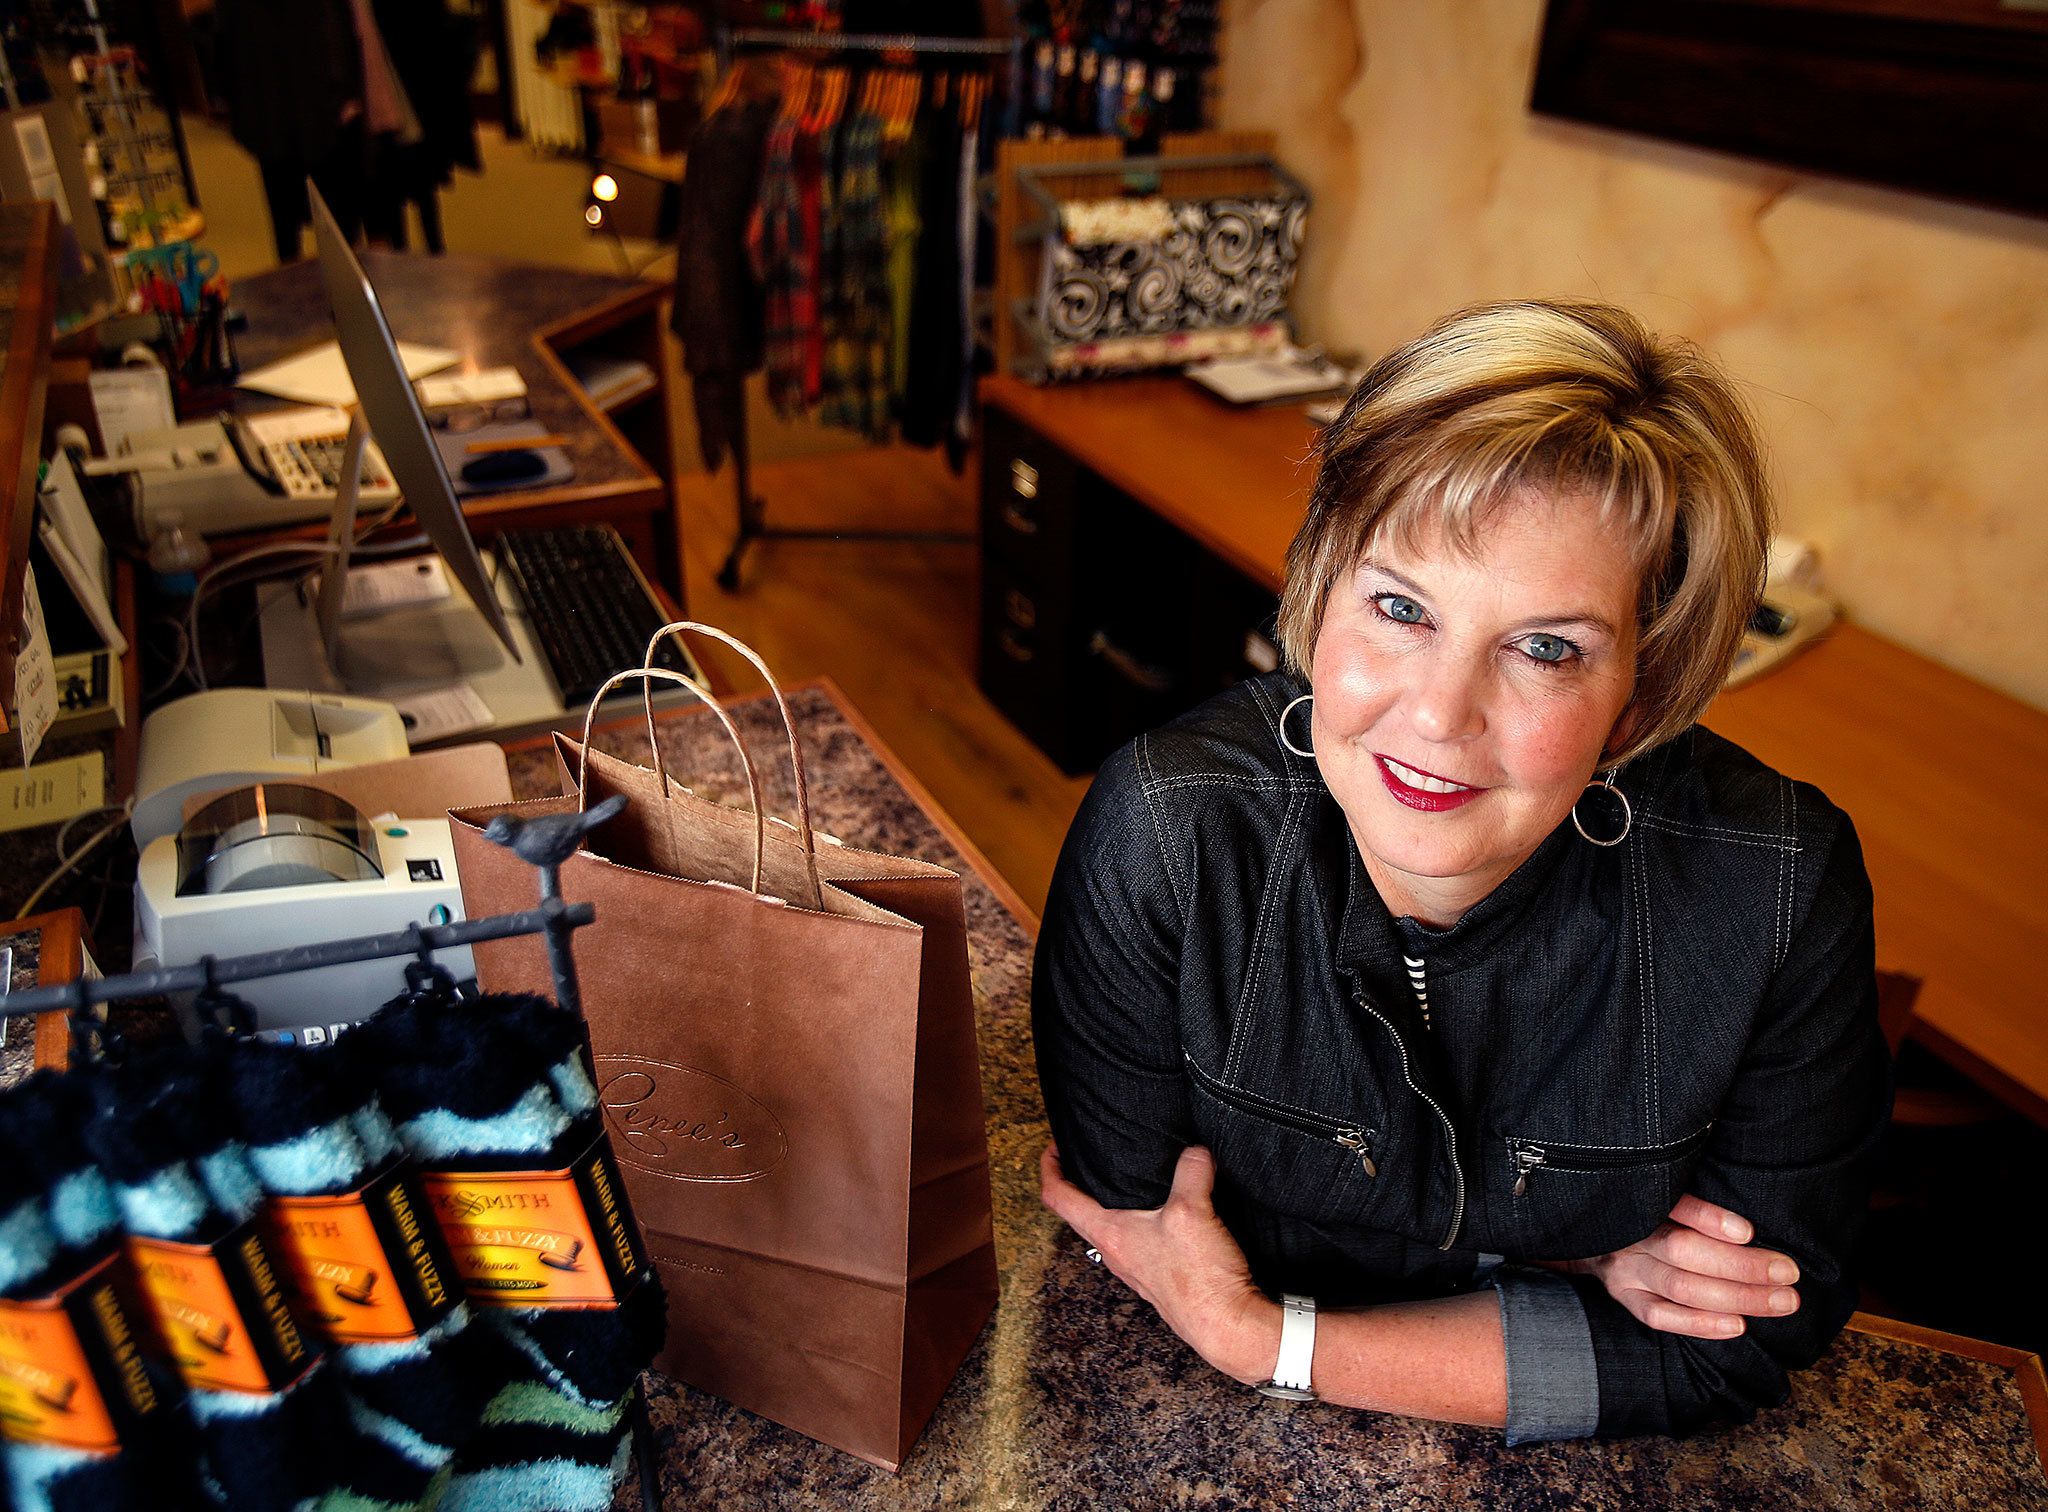 After 23 years running her store, Renee Quistorf is selling the fine clothing and shoe shop she calls simply “Renee’s” at 2820 Colby Avenue in Everett. (Dan Bates/The Herald)